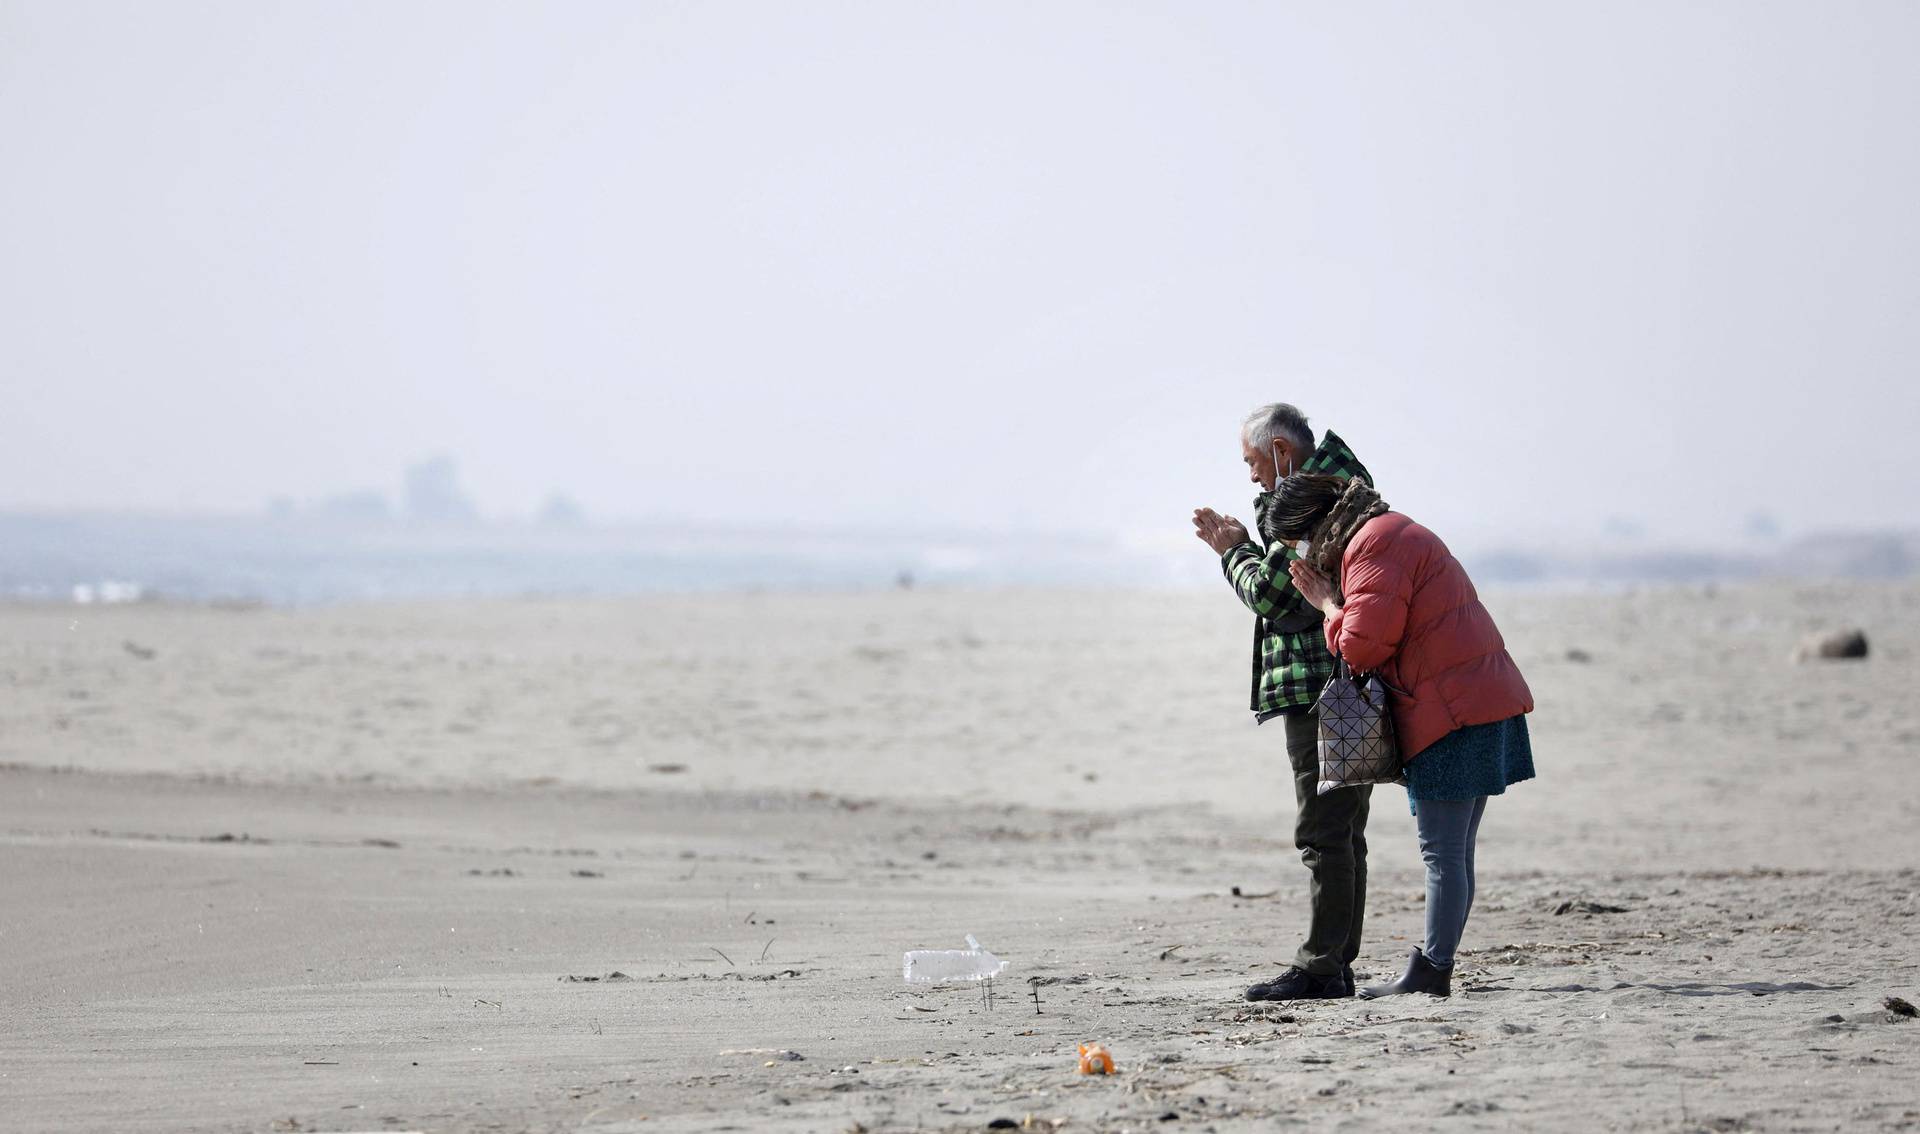 A couple prays on a beach in the Arahama district of Sendai